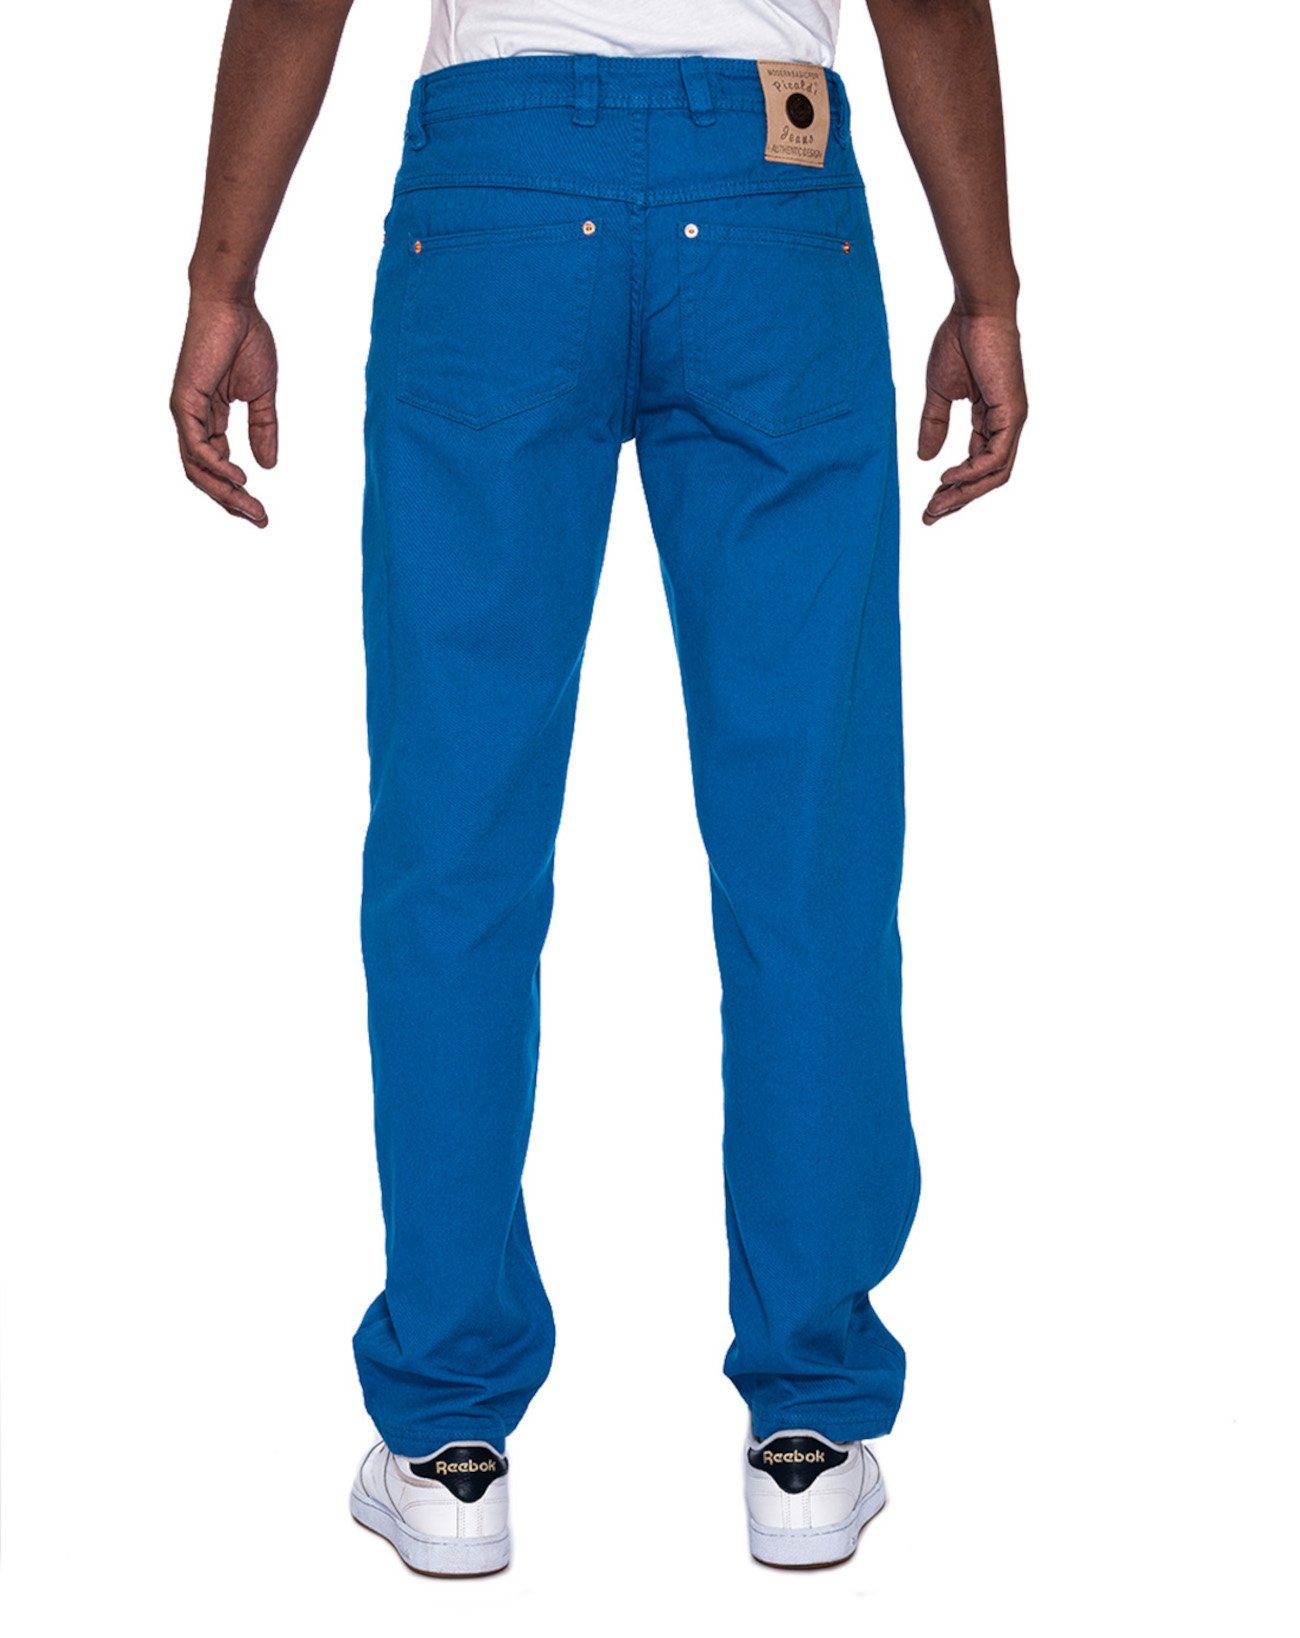 Sommerhose, Gabardine Tapered-fit-Jeans Fit, Blue Relaxed Royal Jeans Loose 472 Freizeithose Fit, PICALDI Zicco